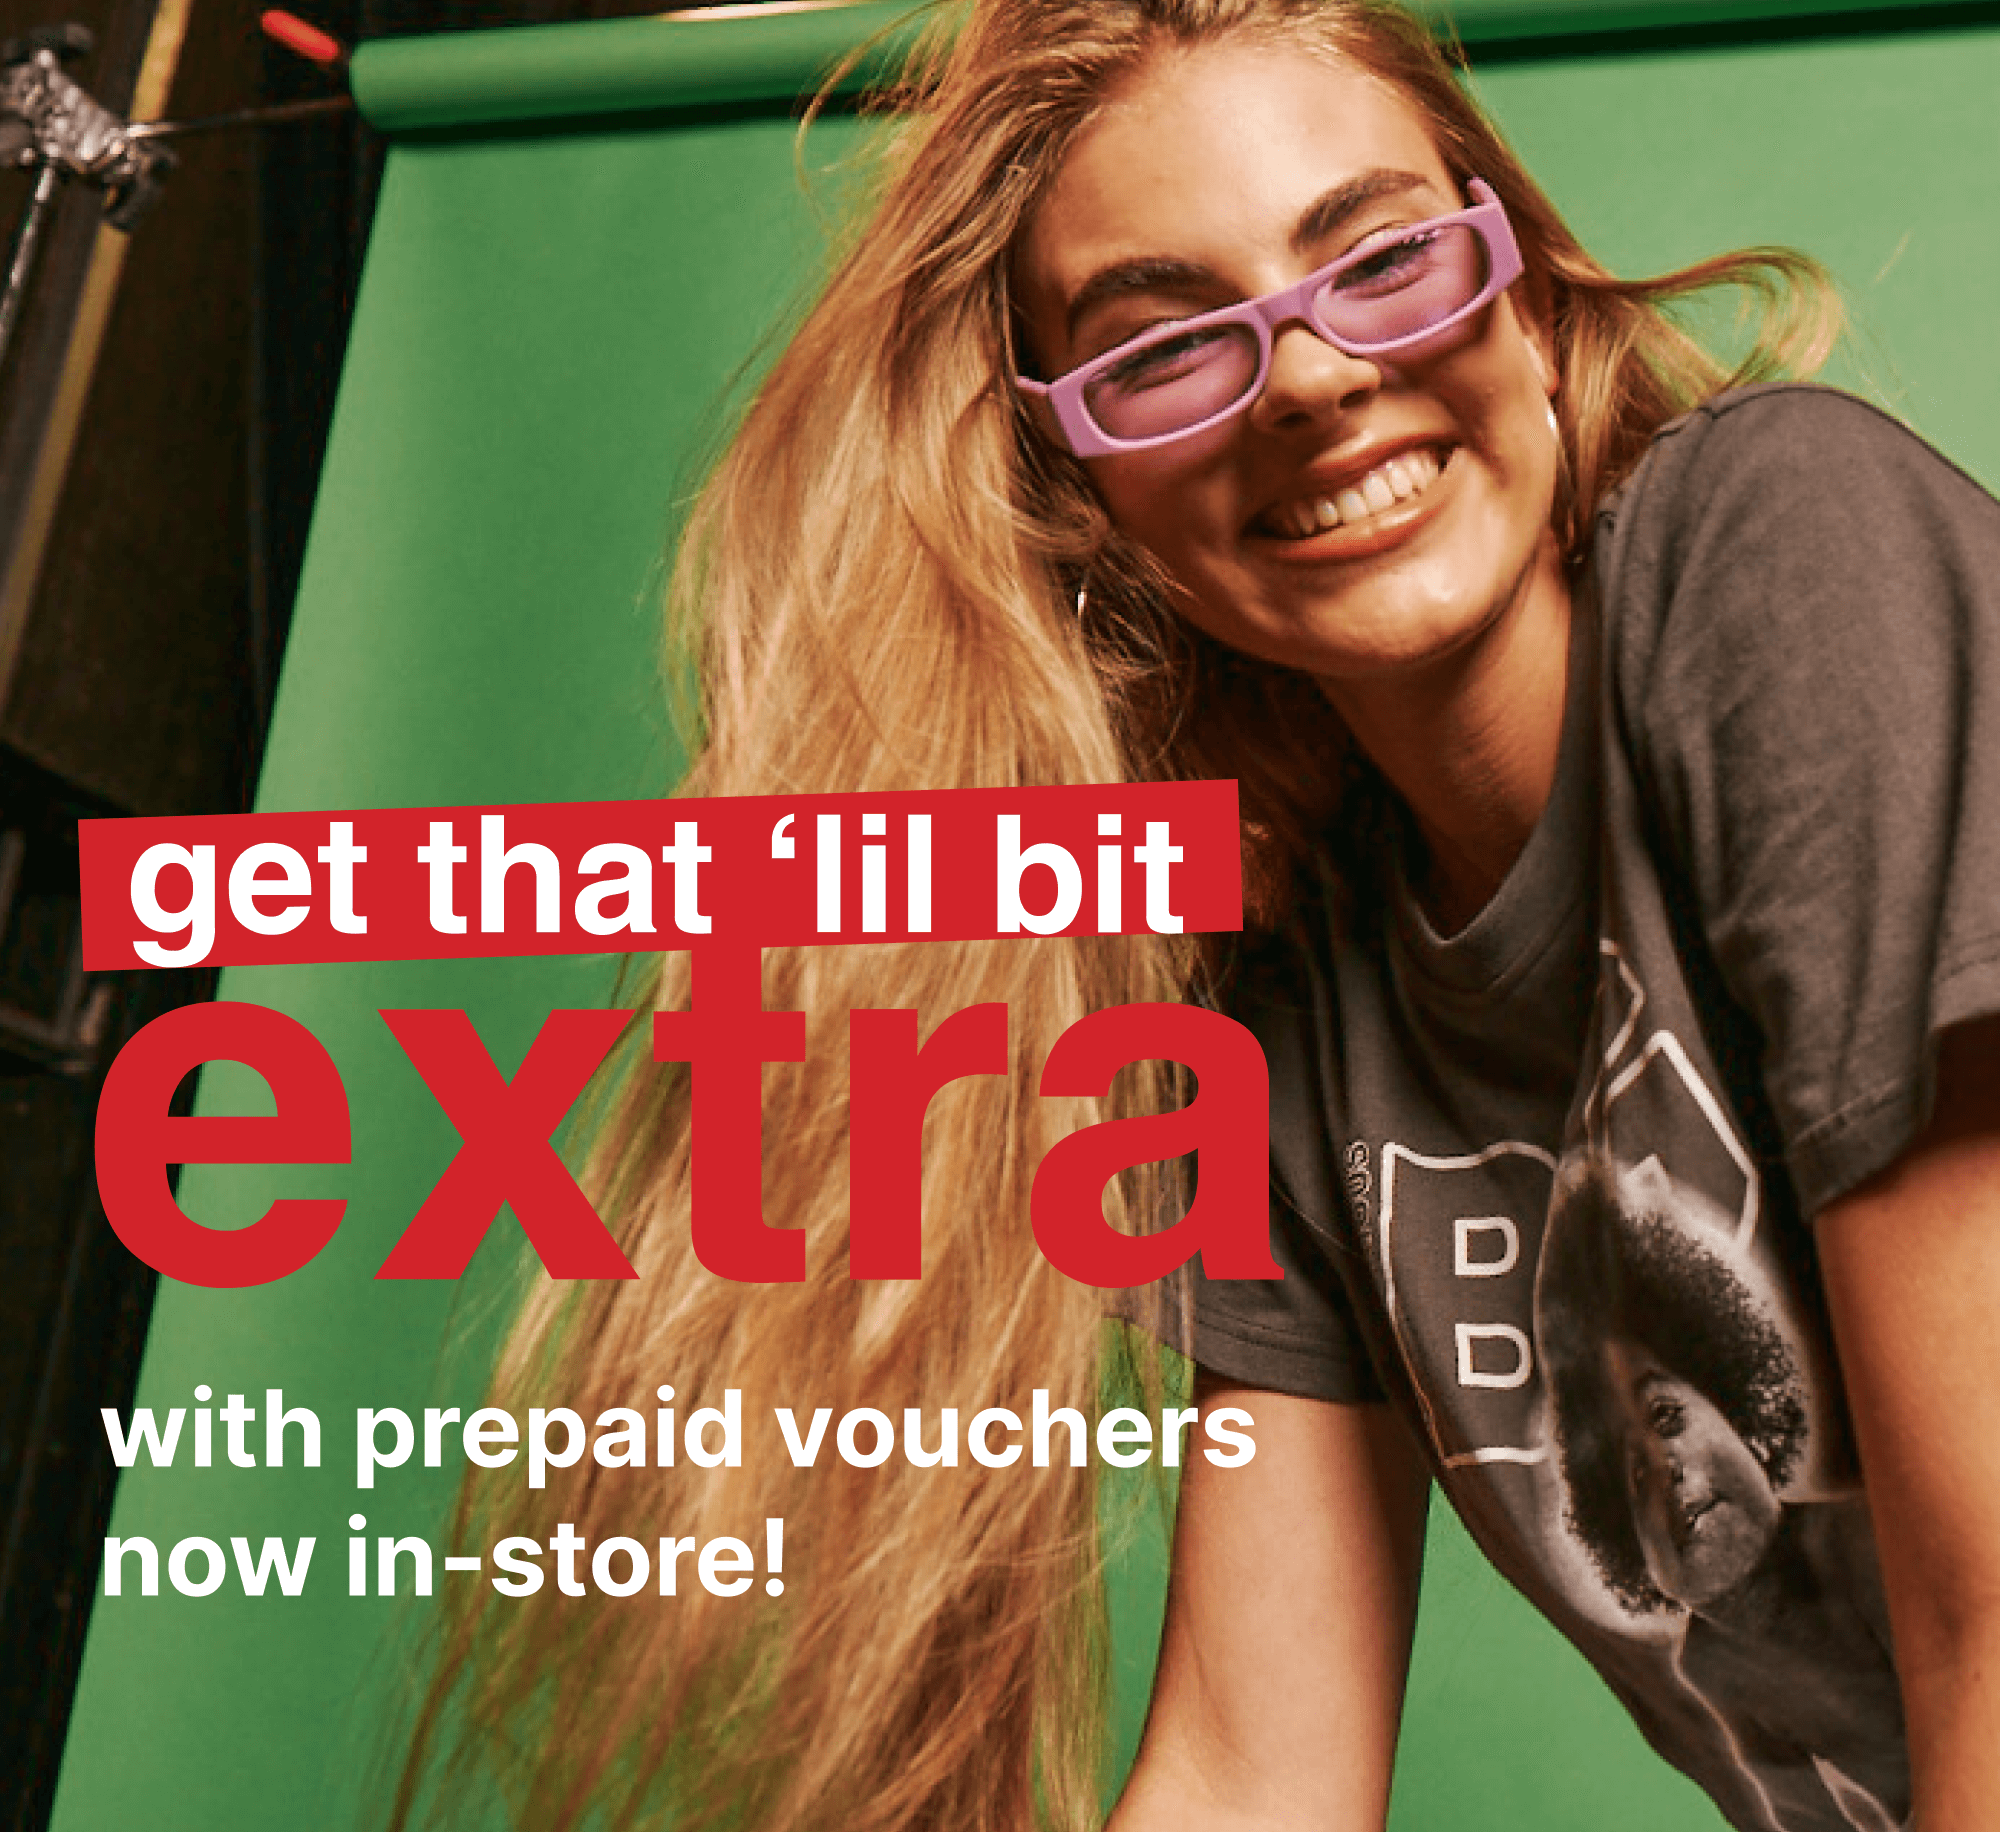 get that li'l bit extra with prepaid vouchers now in store.